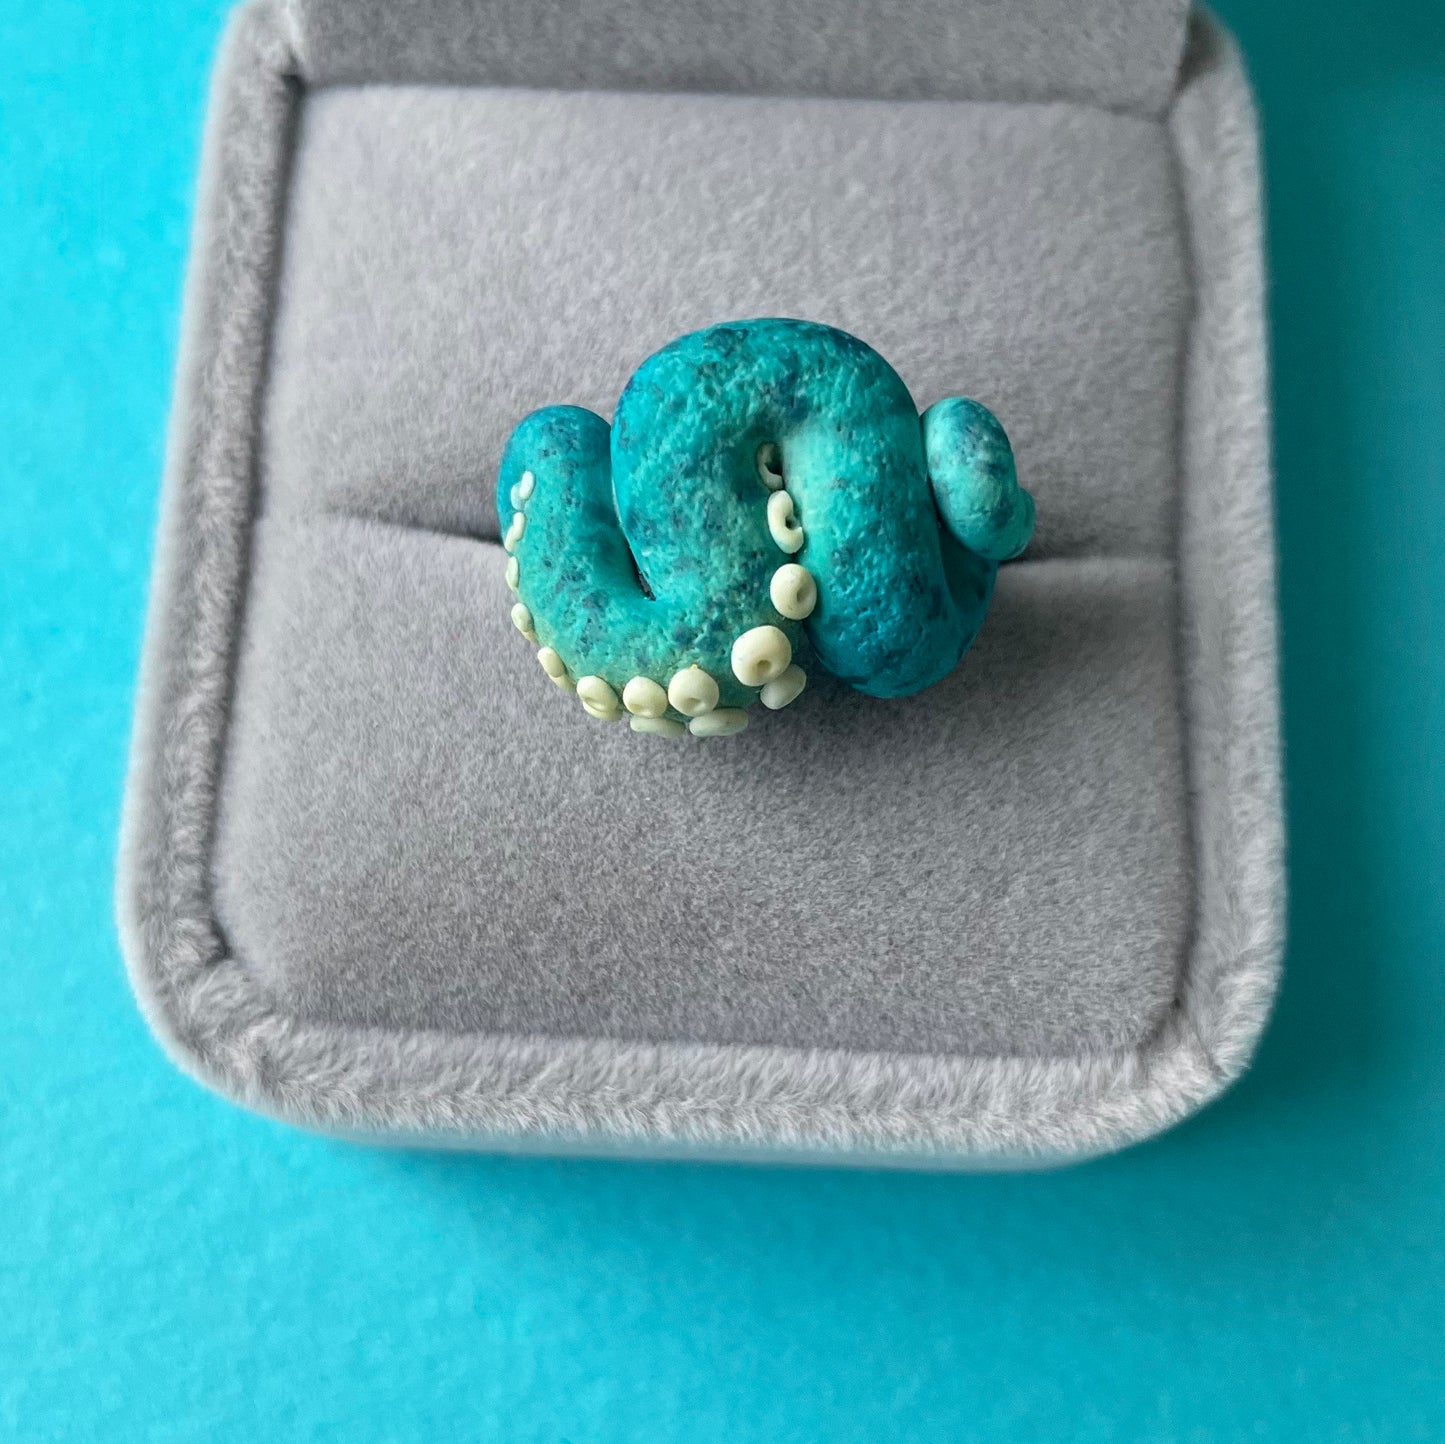 Tentacle ring, cute rings for women,rings for women, adjustable ring, cute ring, tentacle, cool rings, funky ring, creepy ring